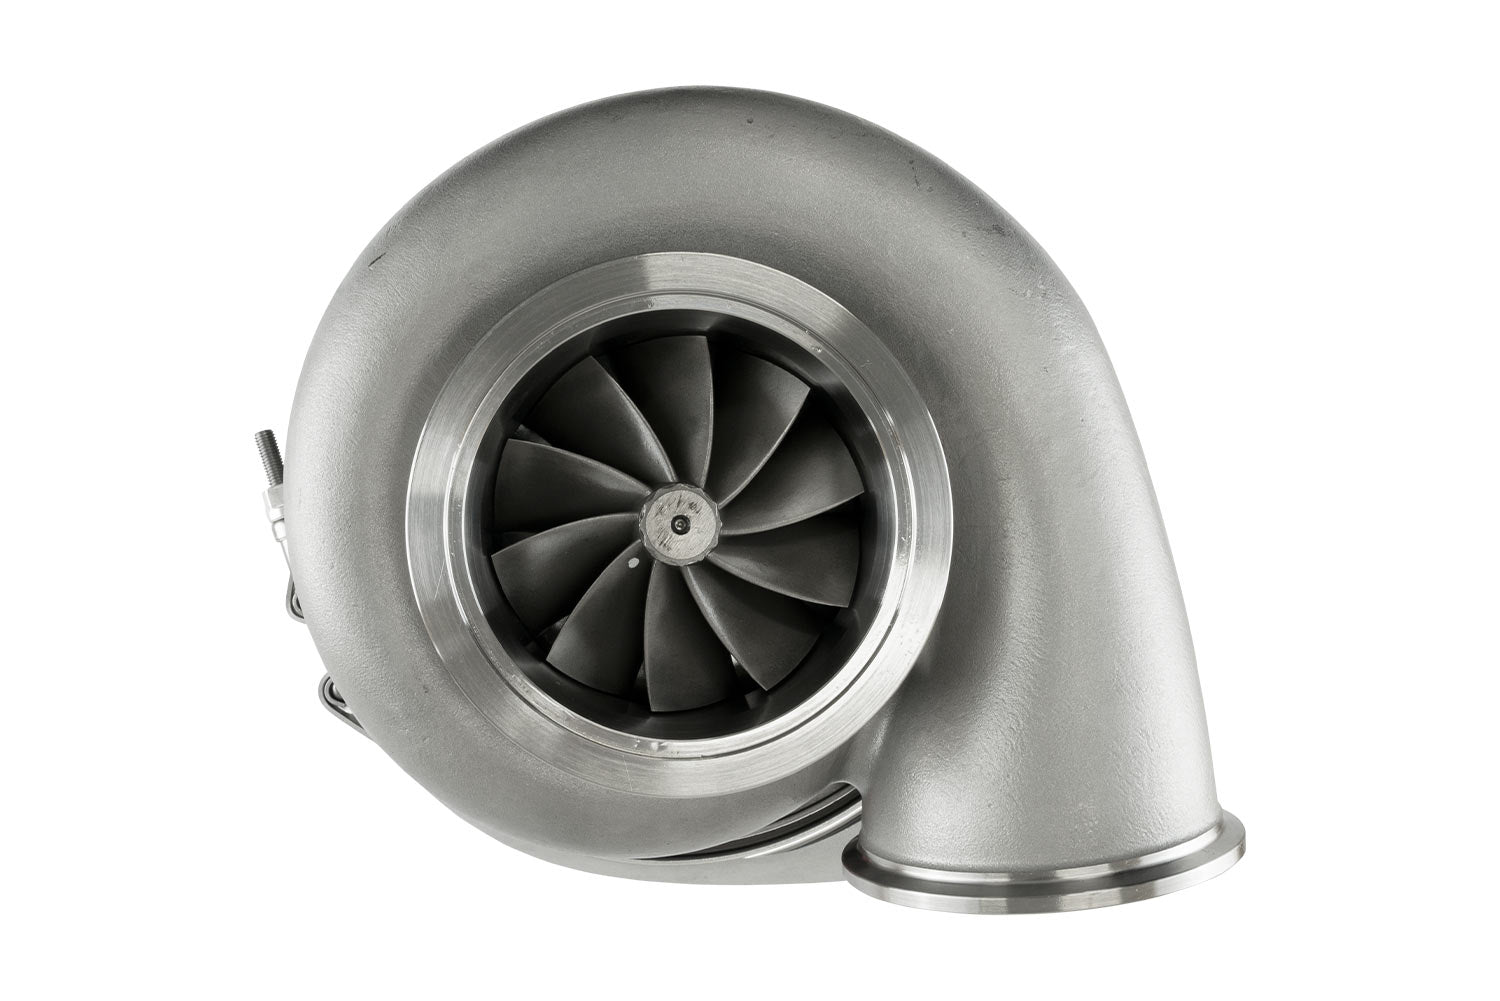 TS-2 Performance Turbocharger (Water Cooled) 6262 V-Band 0.82AR Externally Wastegated